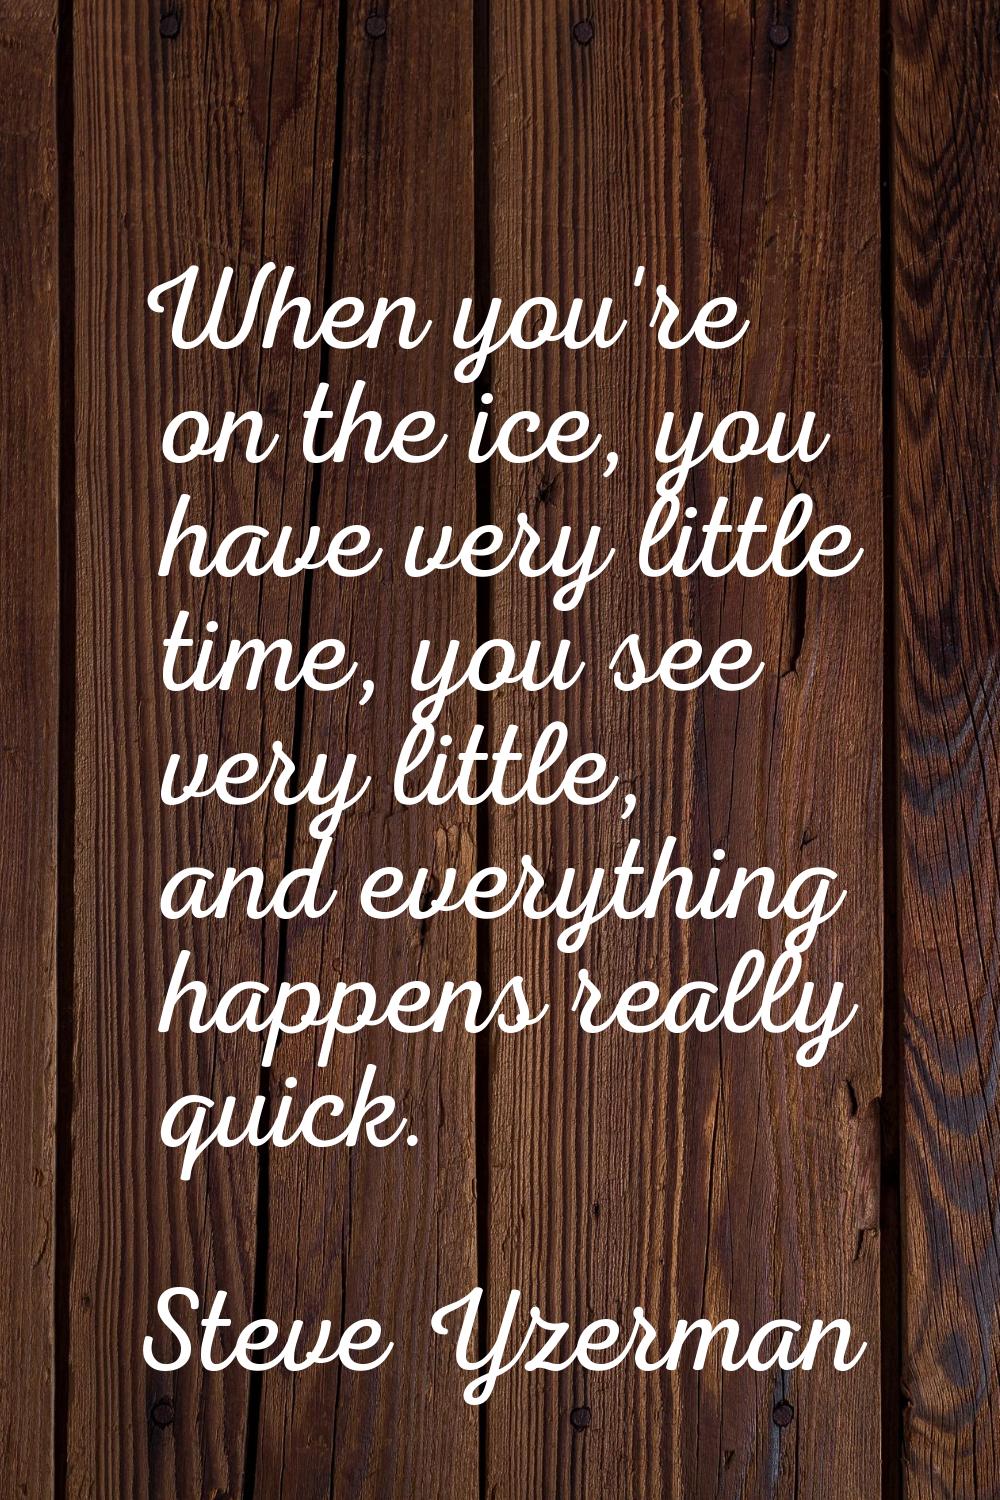 When you're on the ice, you have very little time, you see very little, and everything happens real